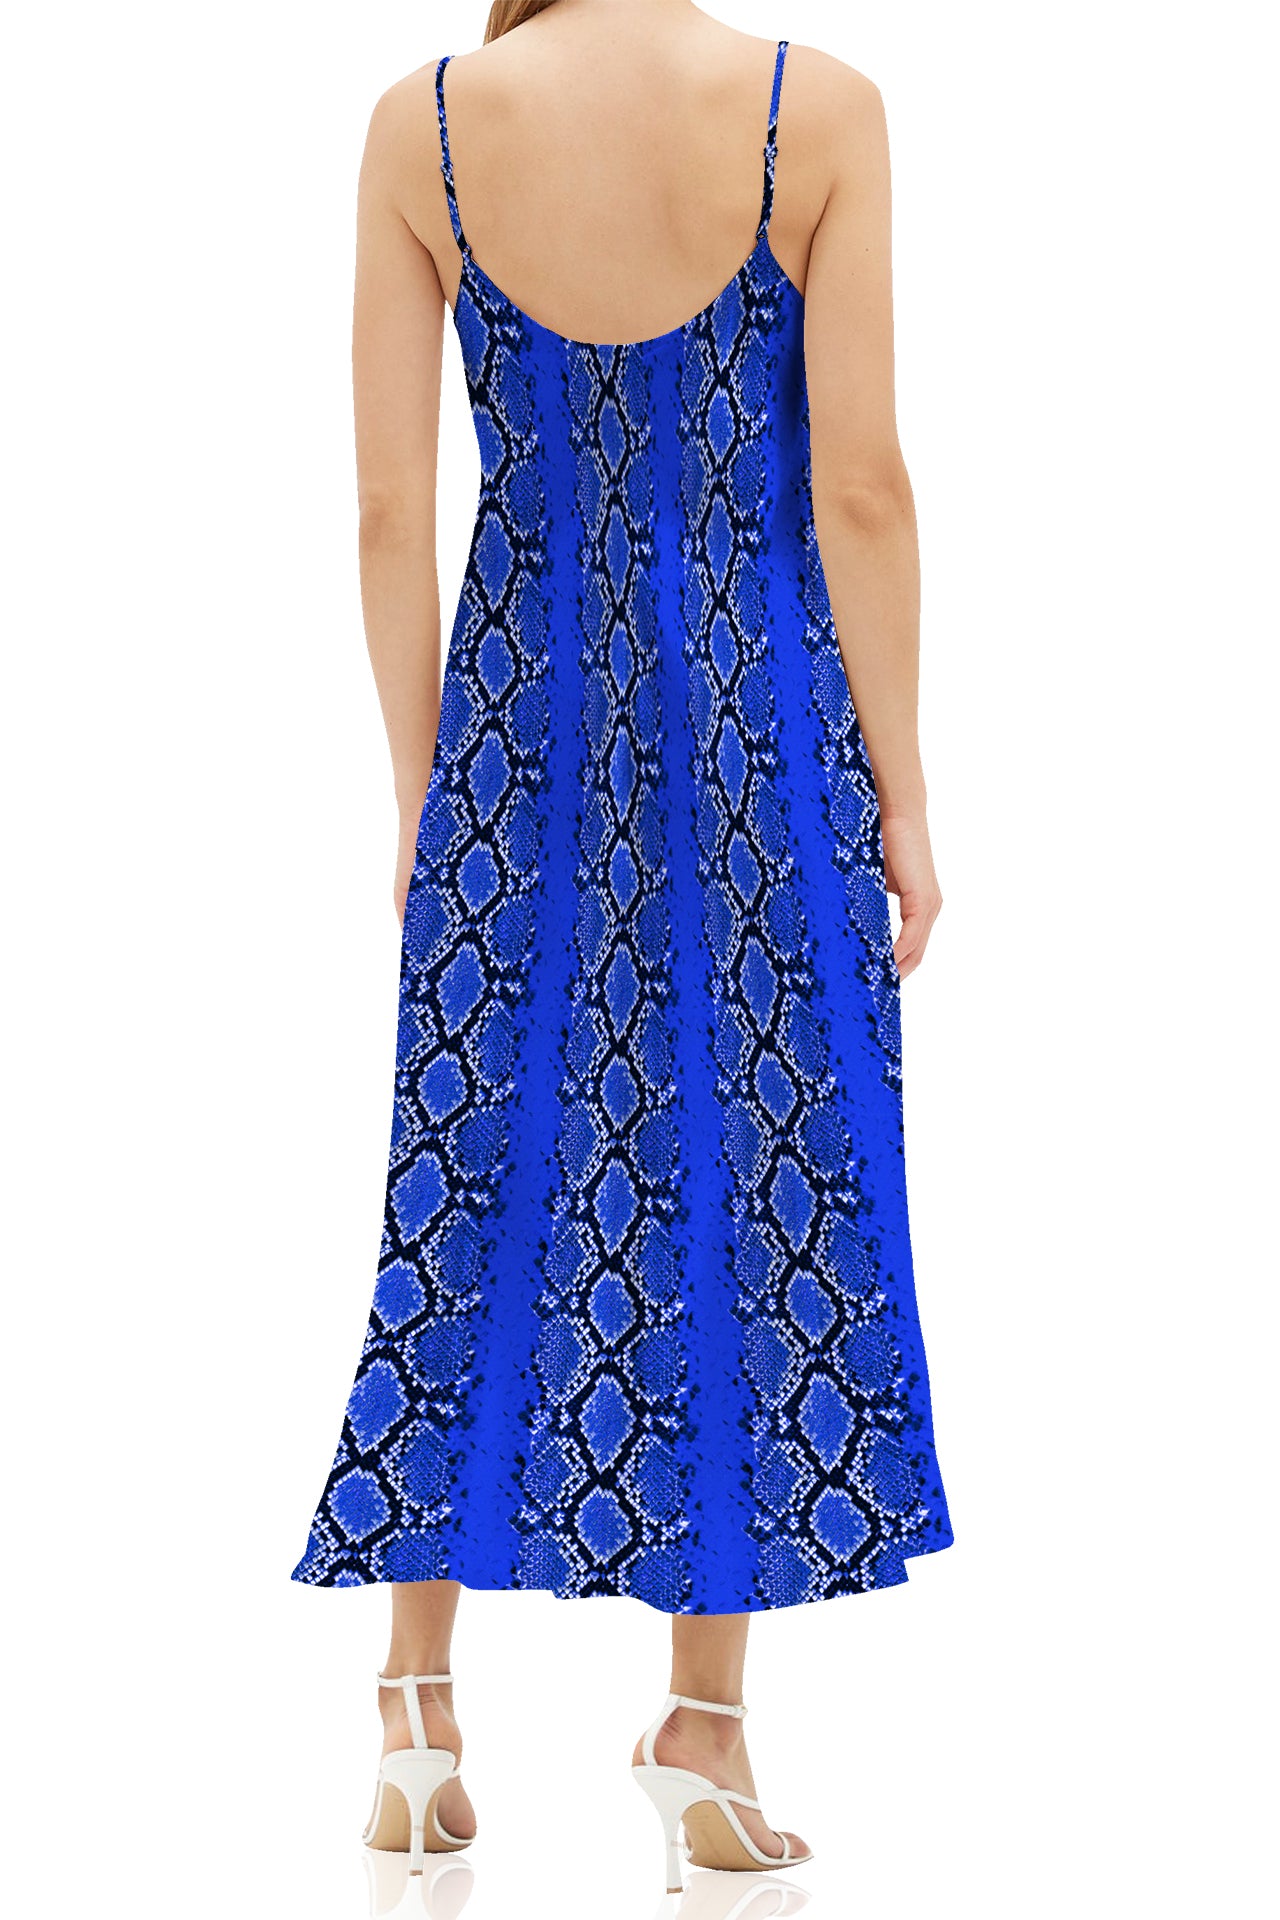 Made with Cupro Silk in Snake Print Midi Slip Violet Dress